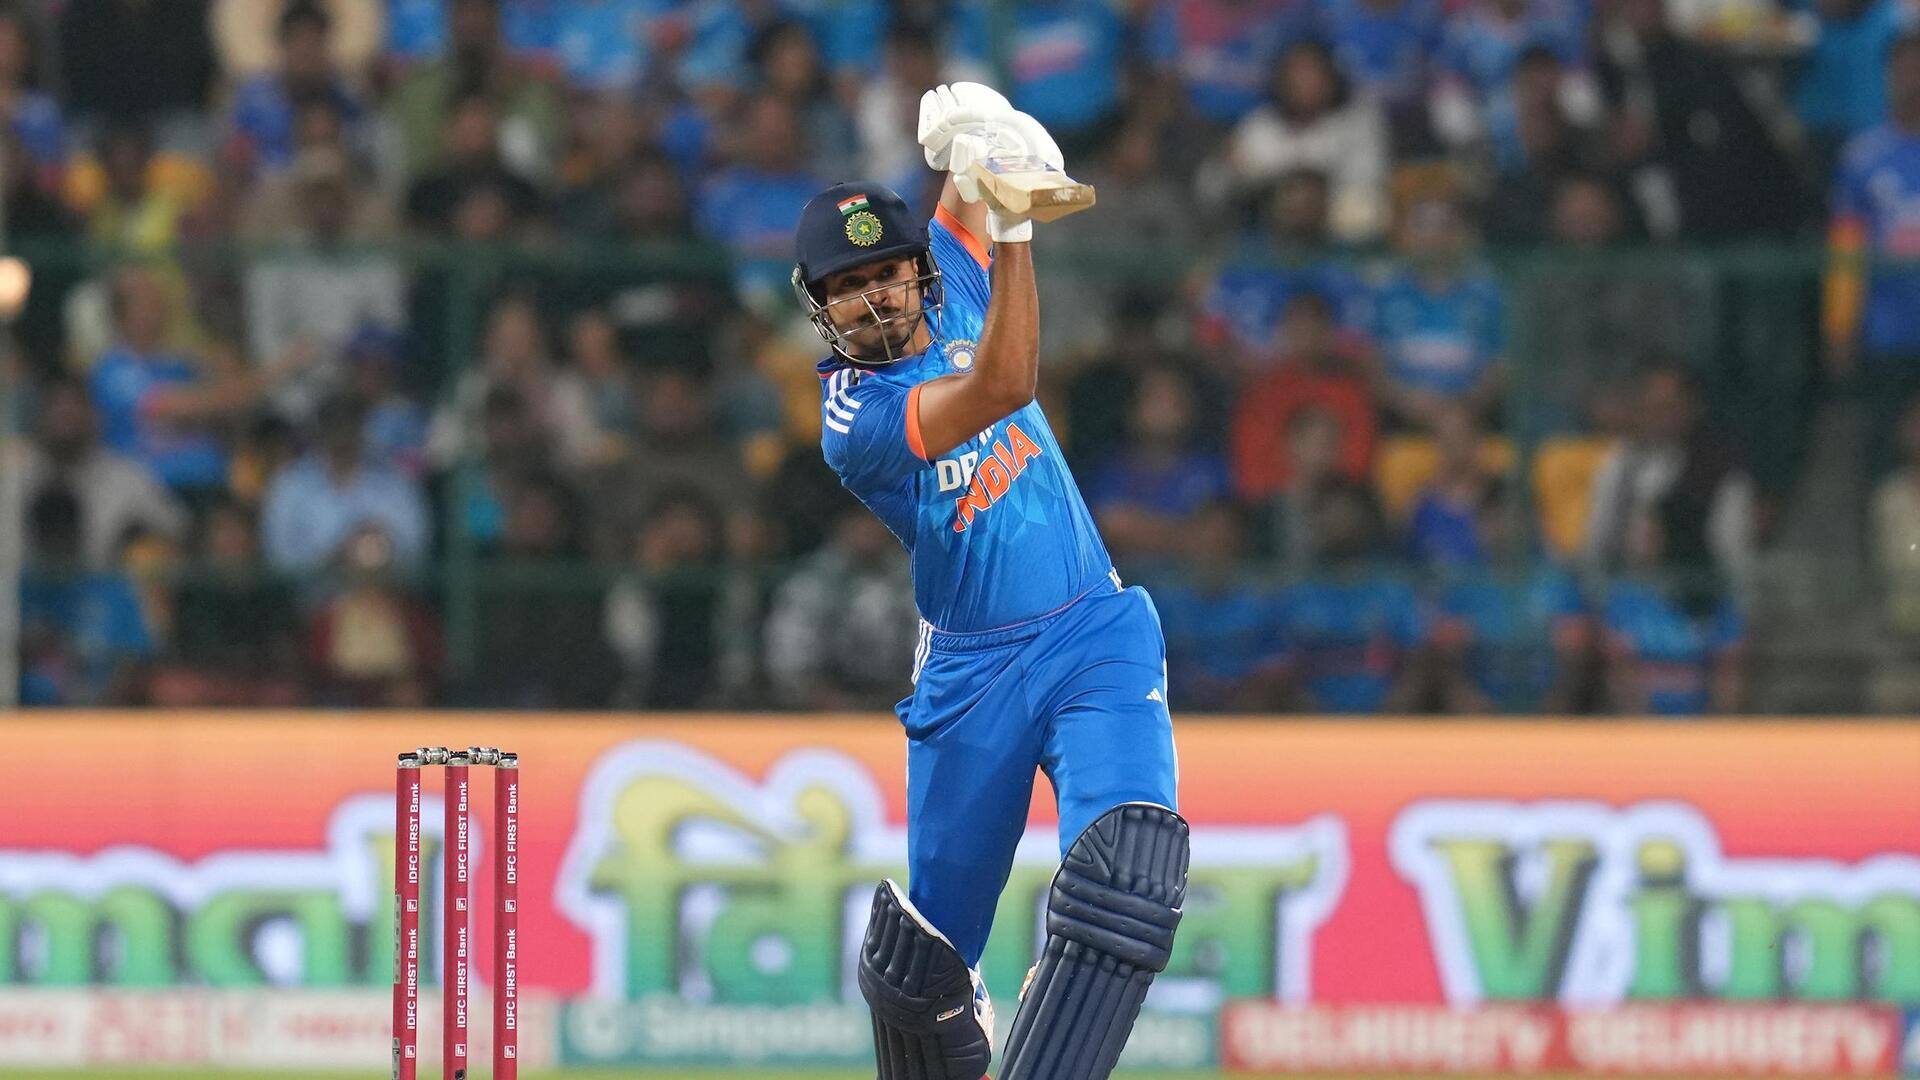 Shreyas Iyer hammers his maiden T20I fifty against Australia: Stats